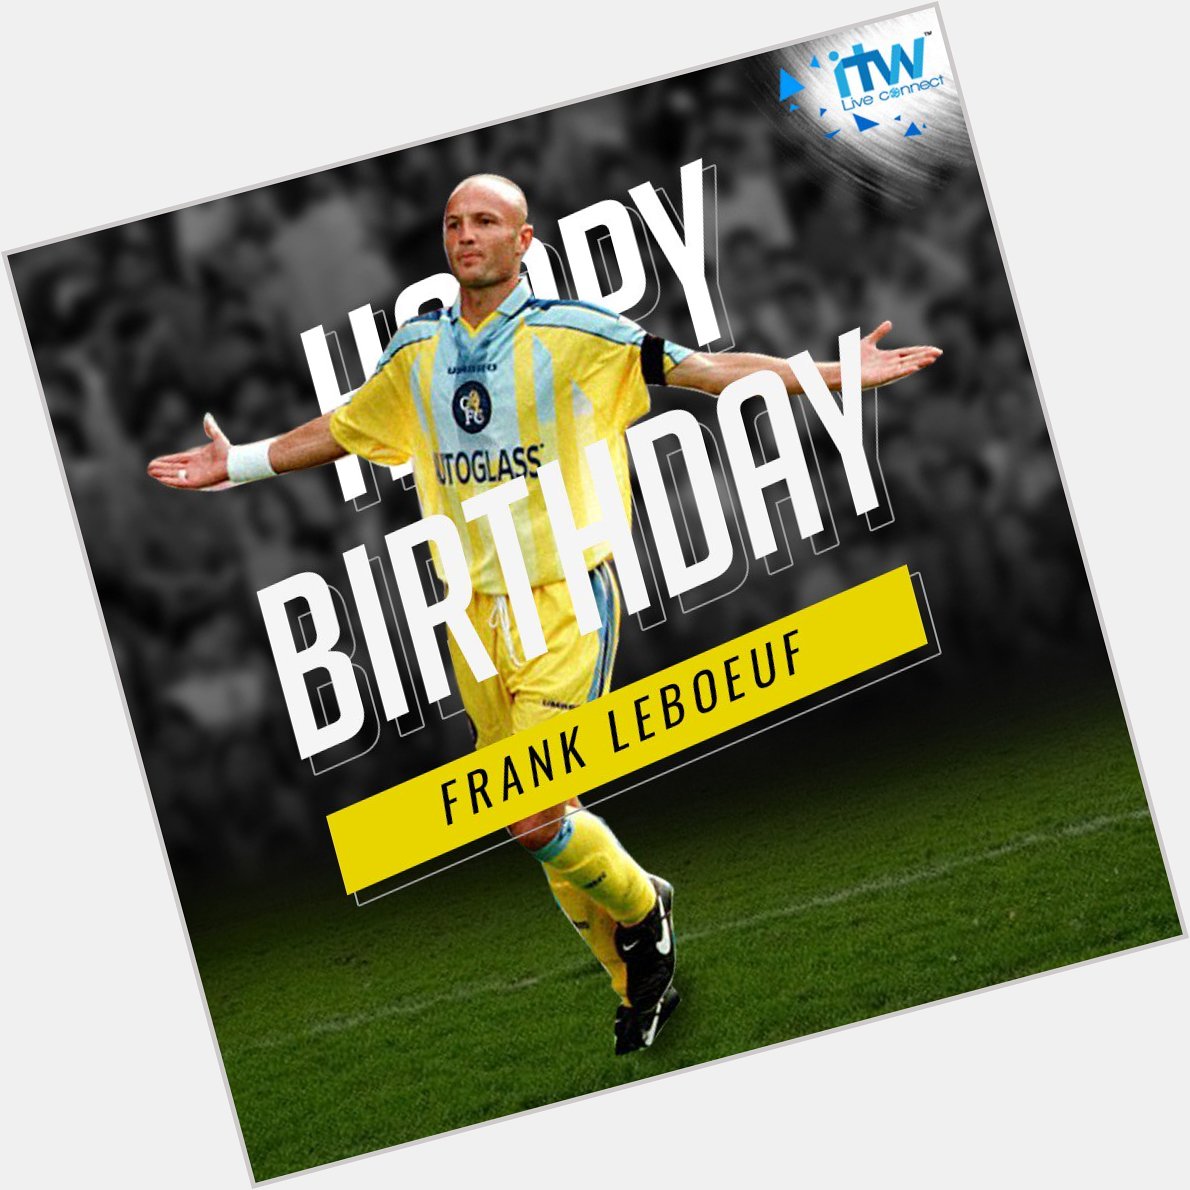 Wishing a very Happy Birthday to former defender Frank Leboeuf! 